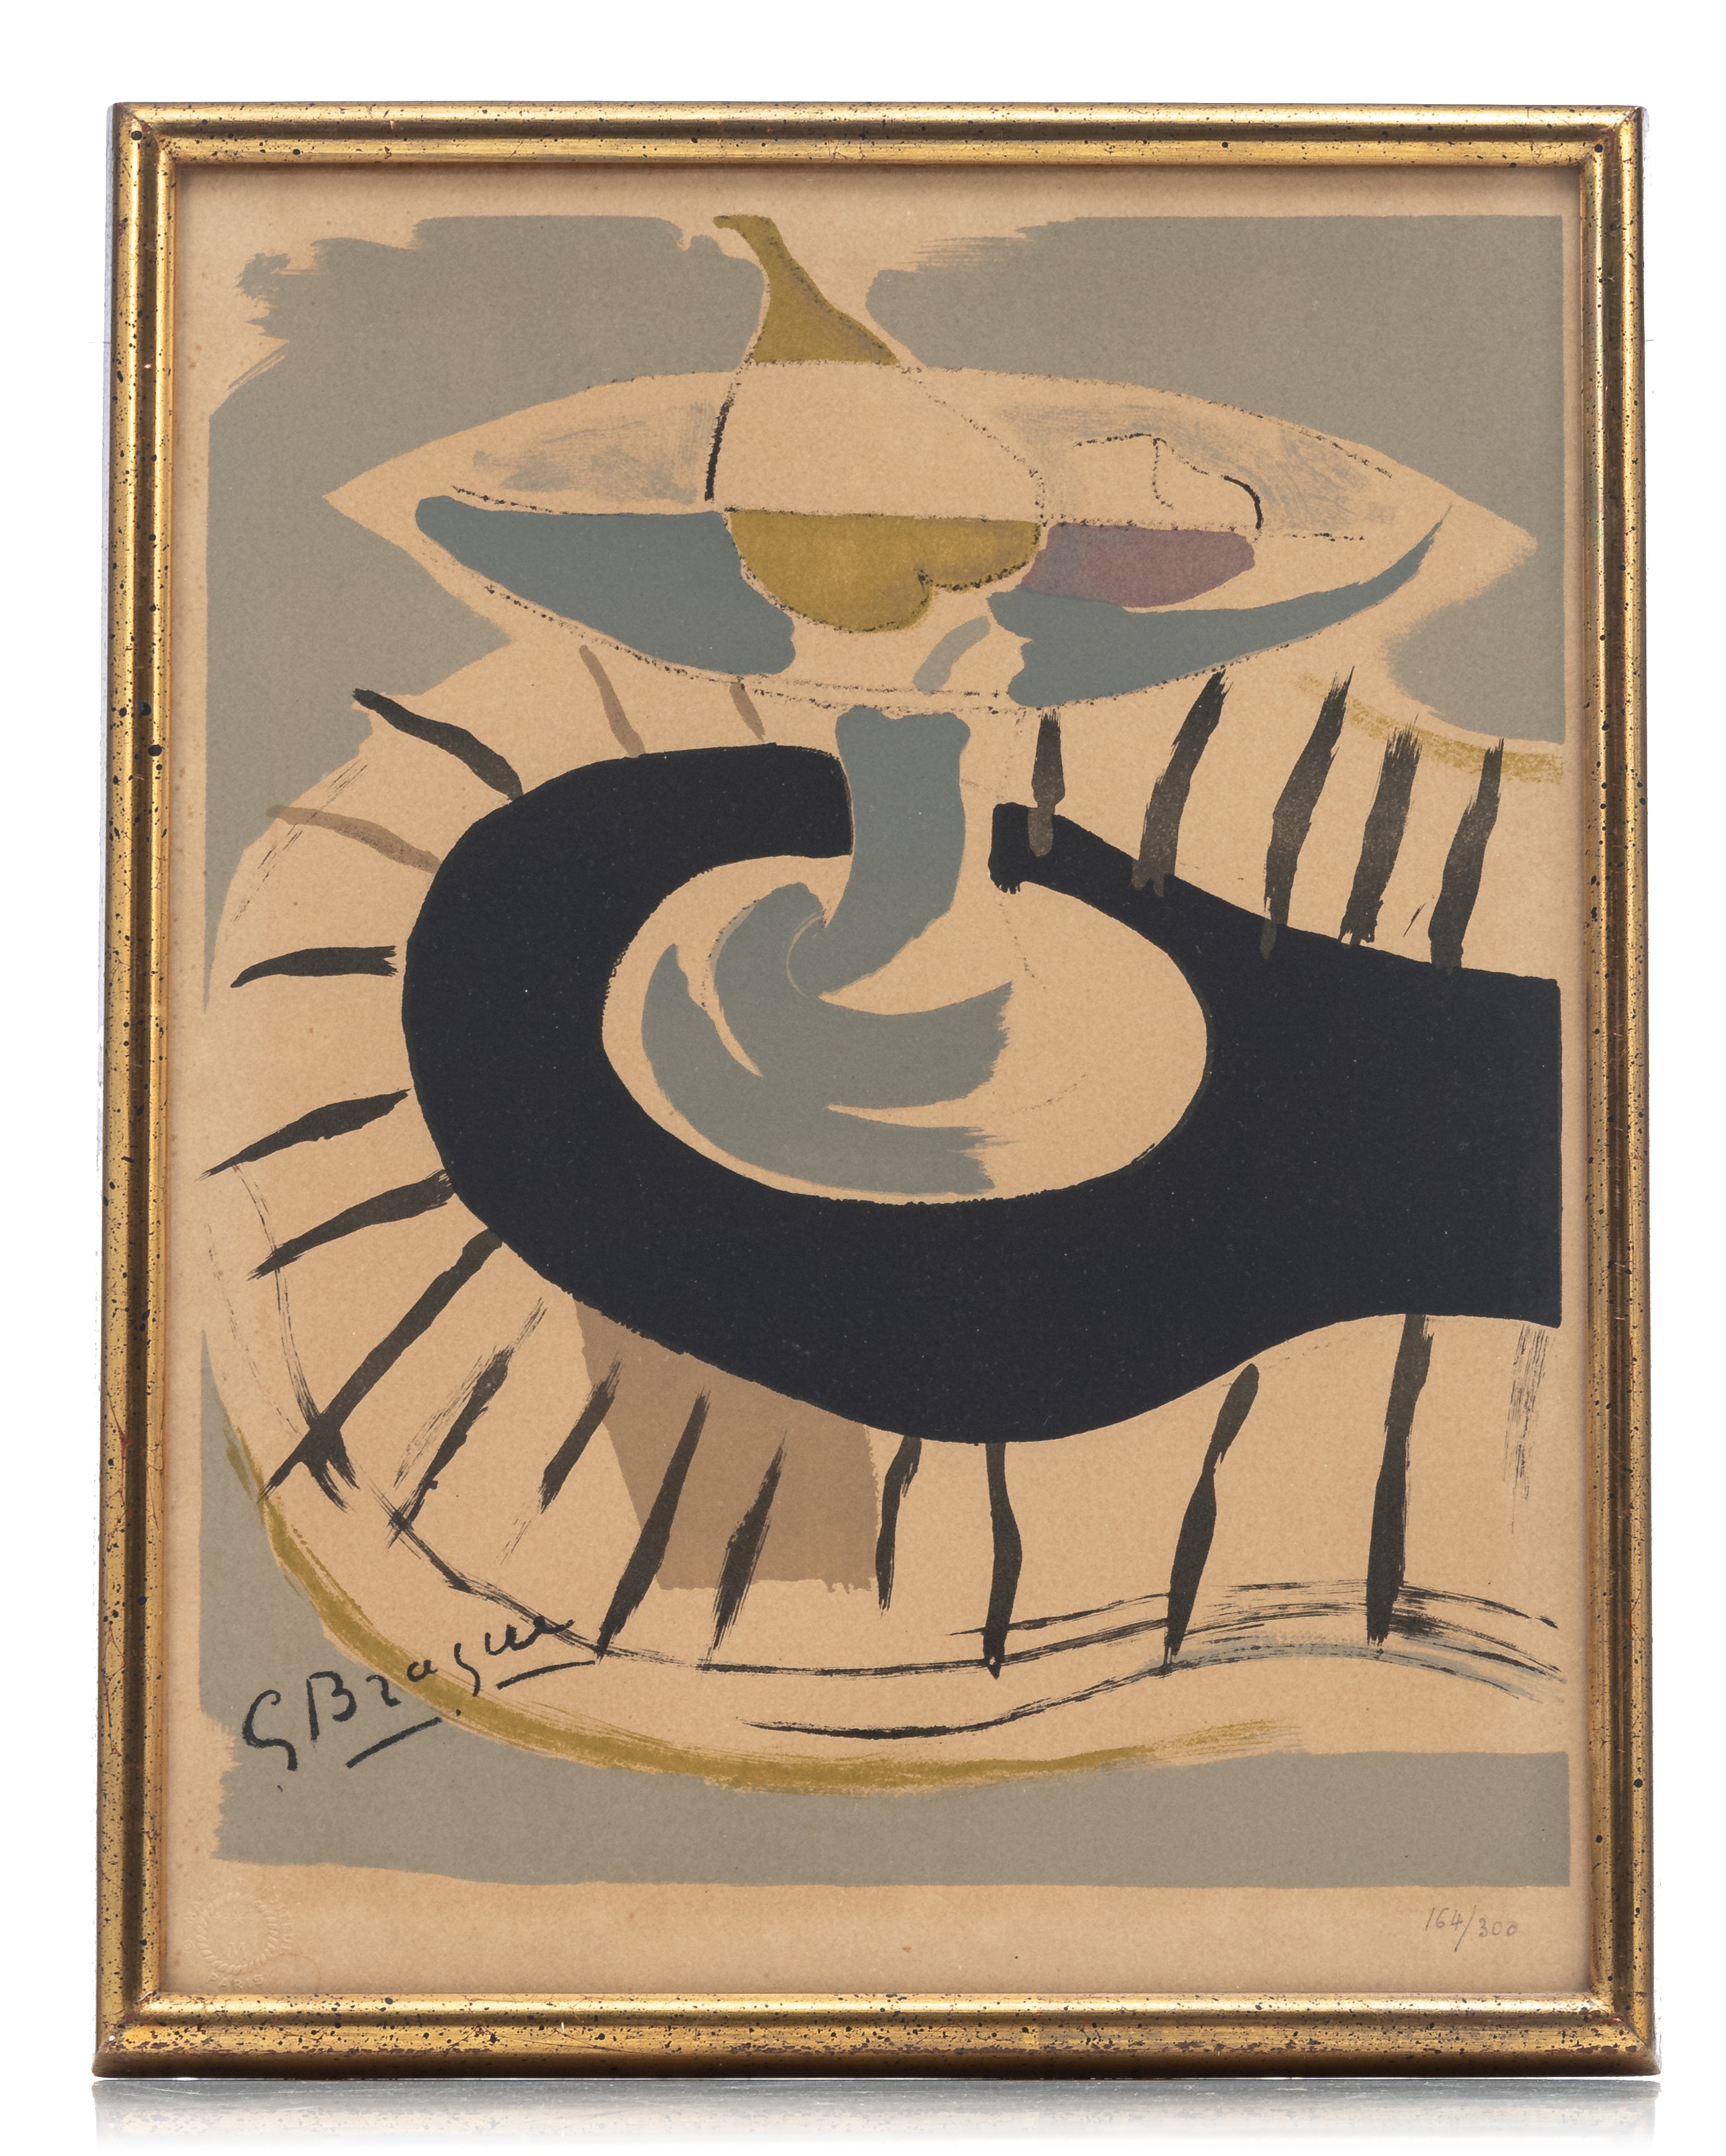 Georges Braque (1882-1963), still life, colour lithograph, N∞ 164/300, 28 x 36 cm - Image 2 of 5